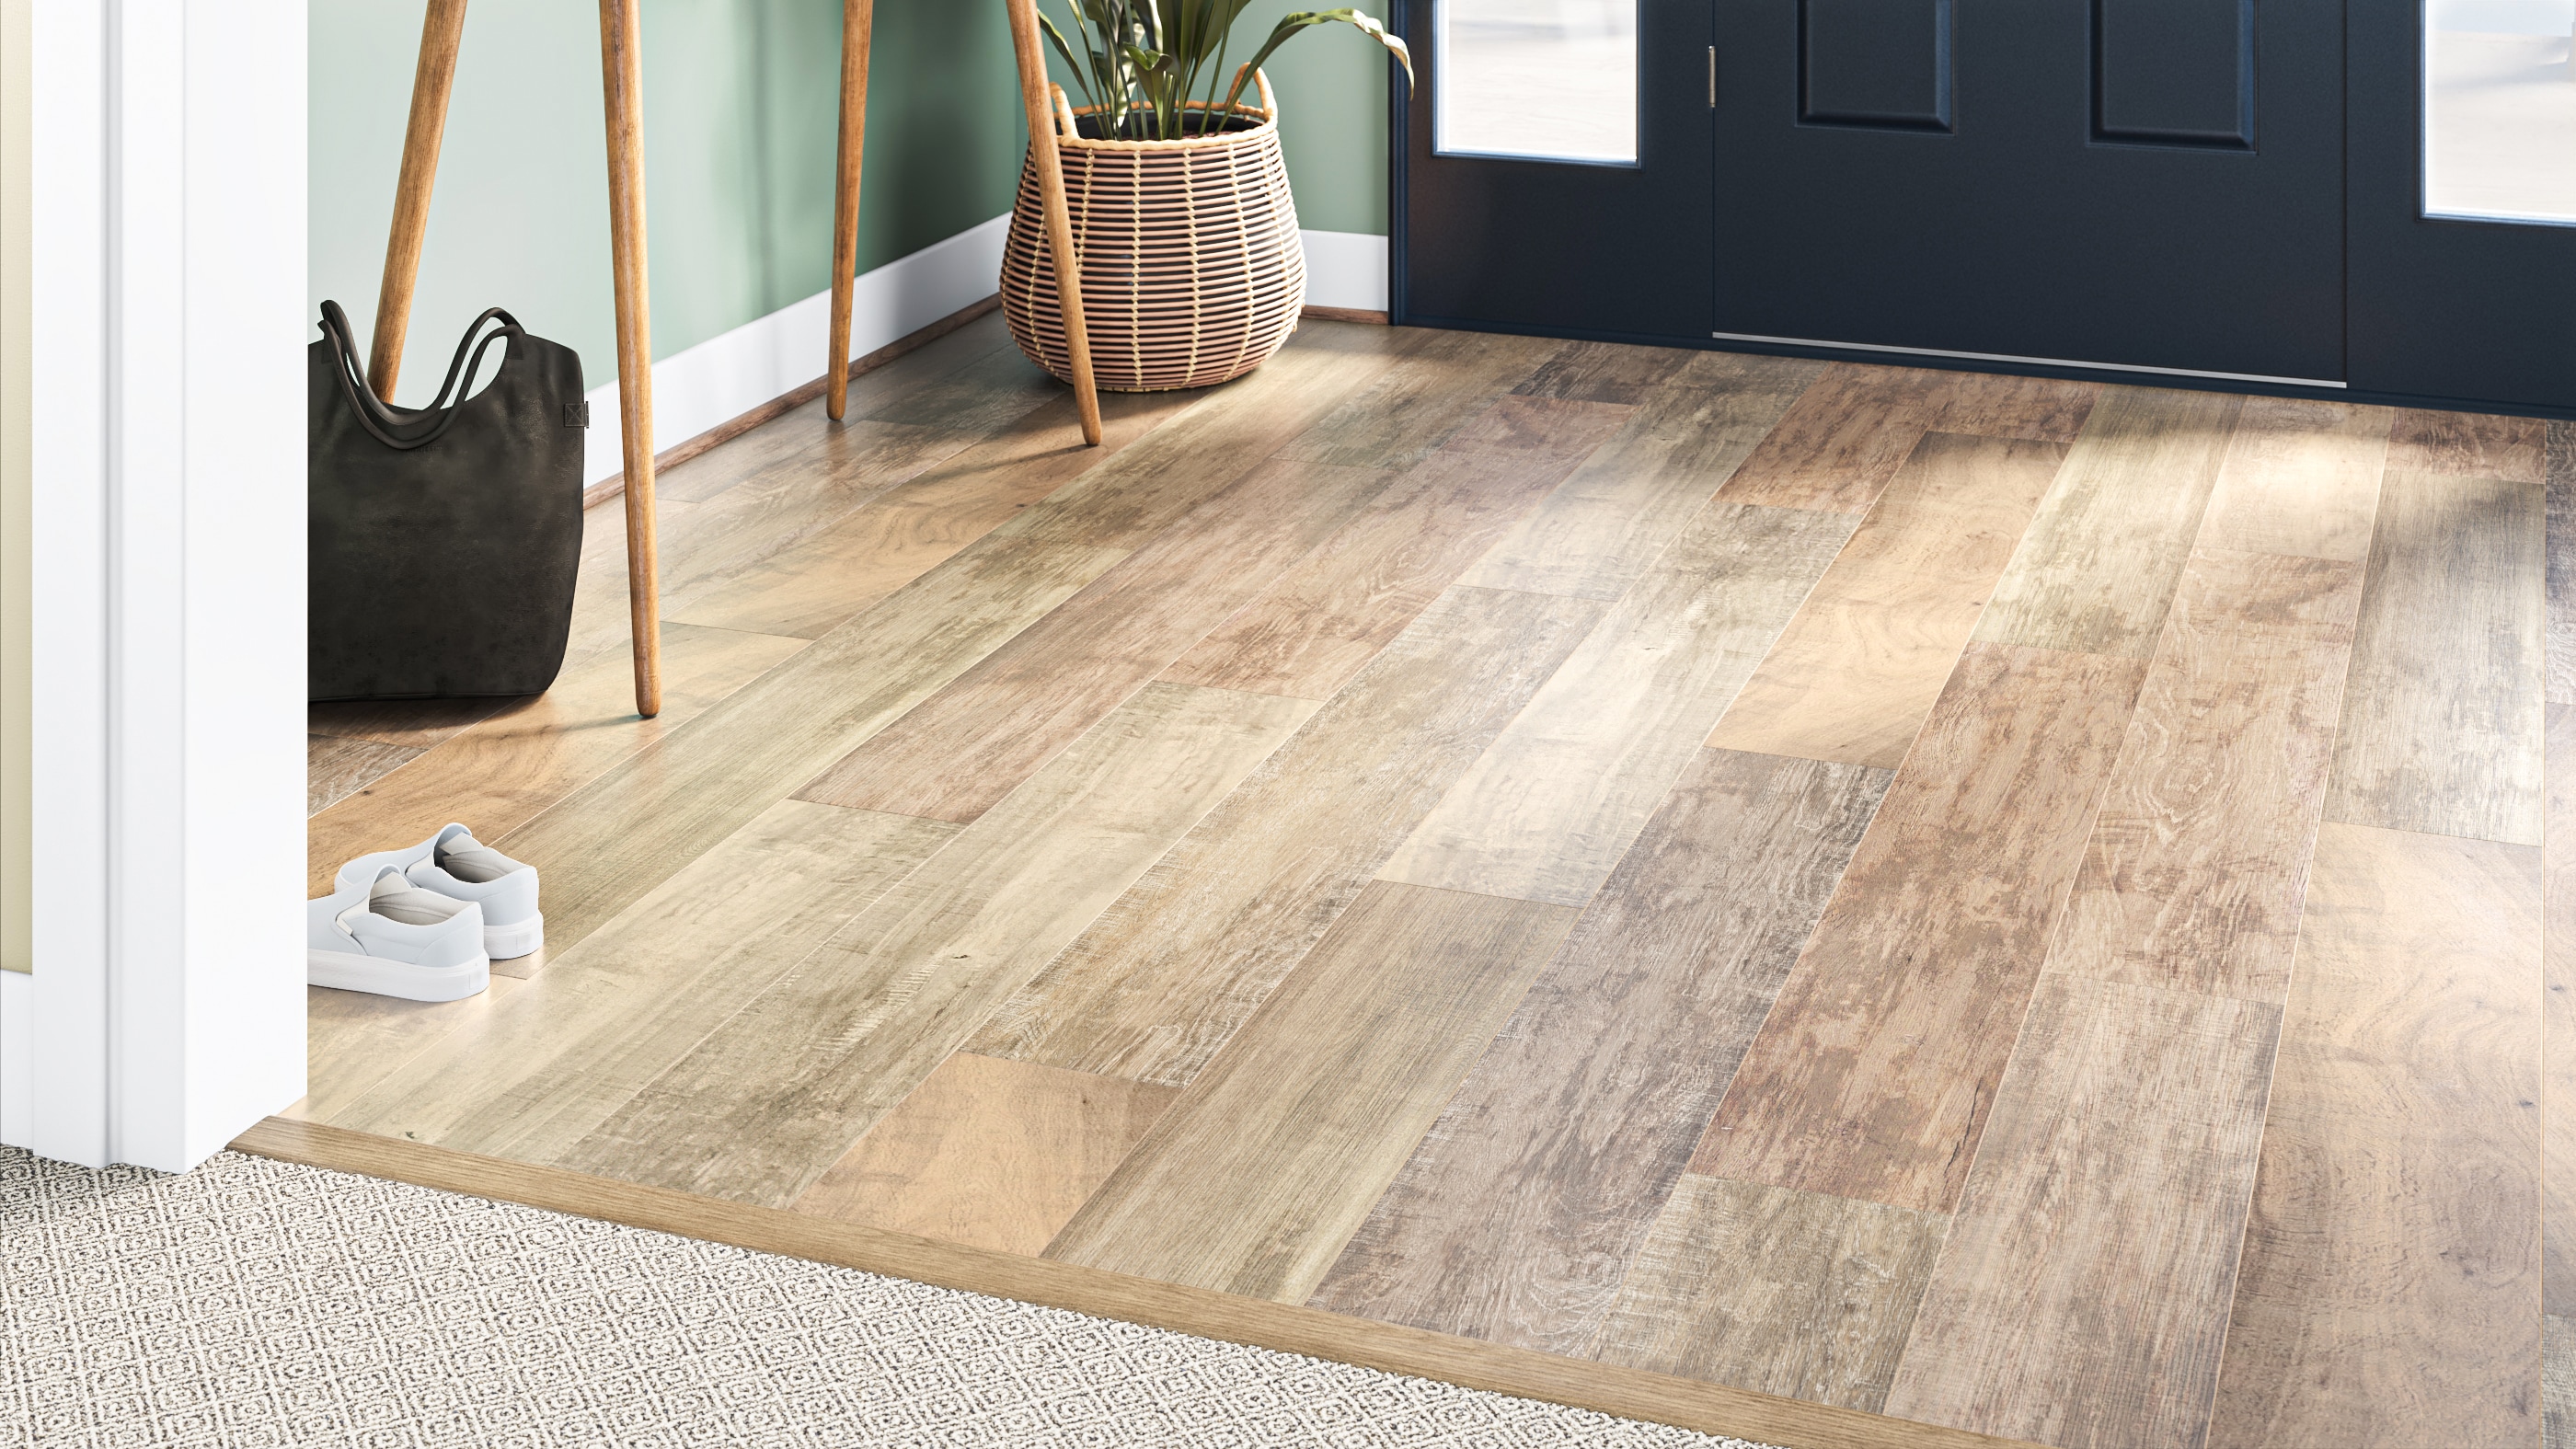 Allen Roth Urbanite Oak 8 Mm T X In W 50 L Water Resistant Wood Plank Laminate Flooring 9 Carton The Department At Lowes Com